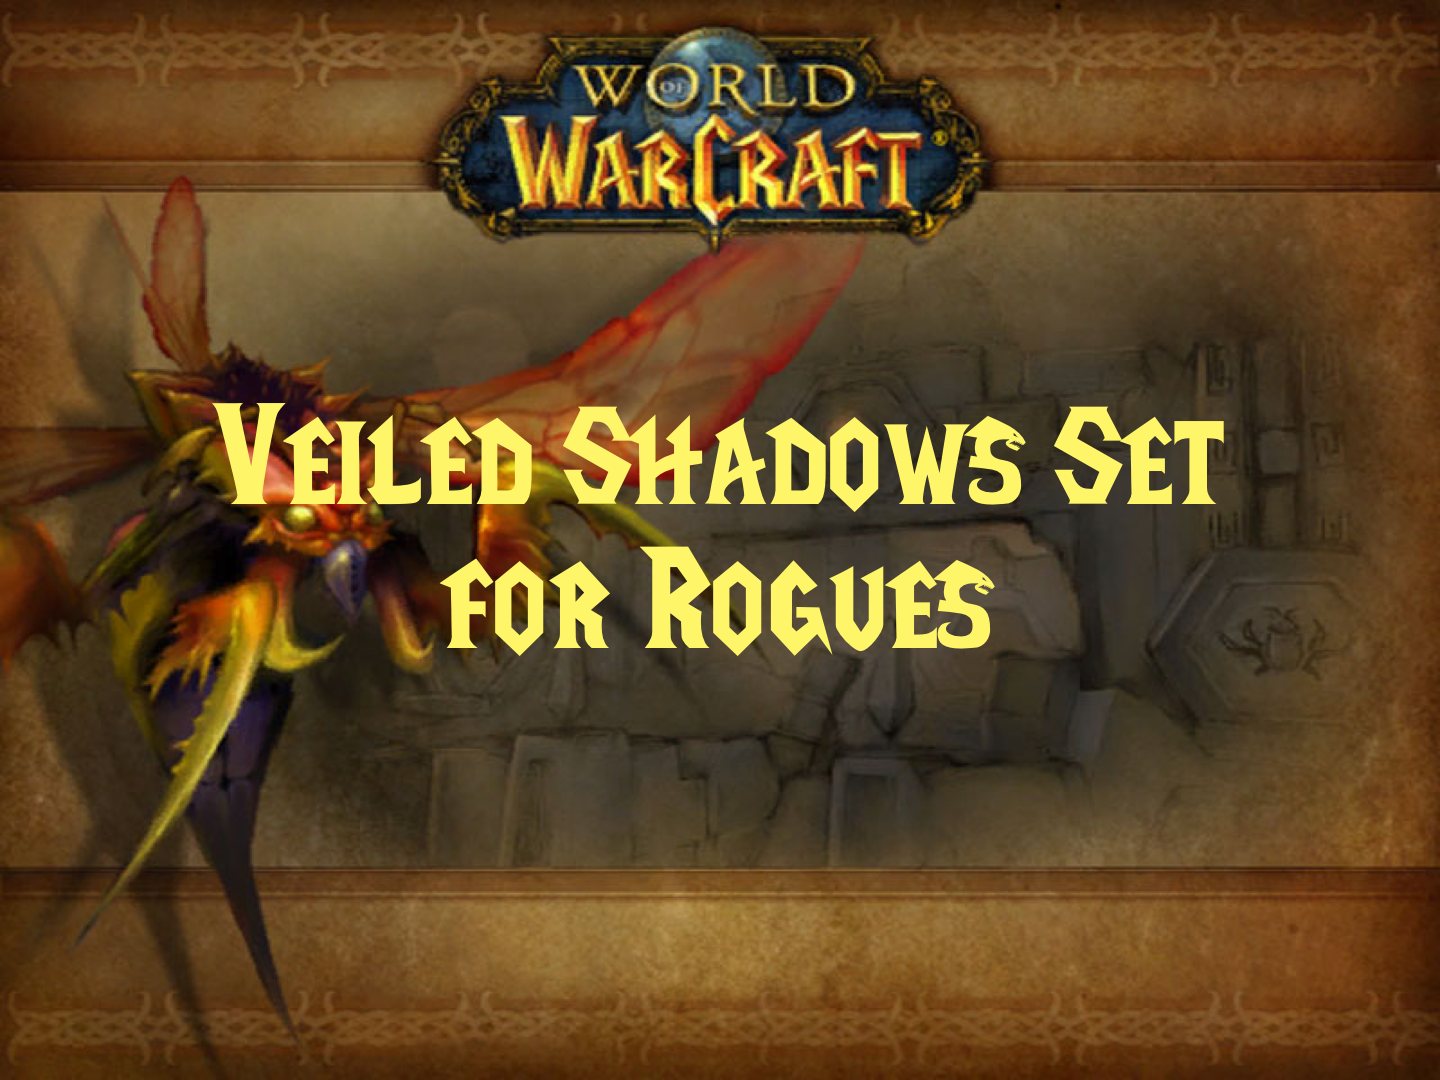 honing Moreel Frank Veiled Shadows Set for Rogues - WoW Classic Bitt's Guides